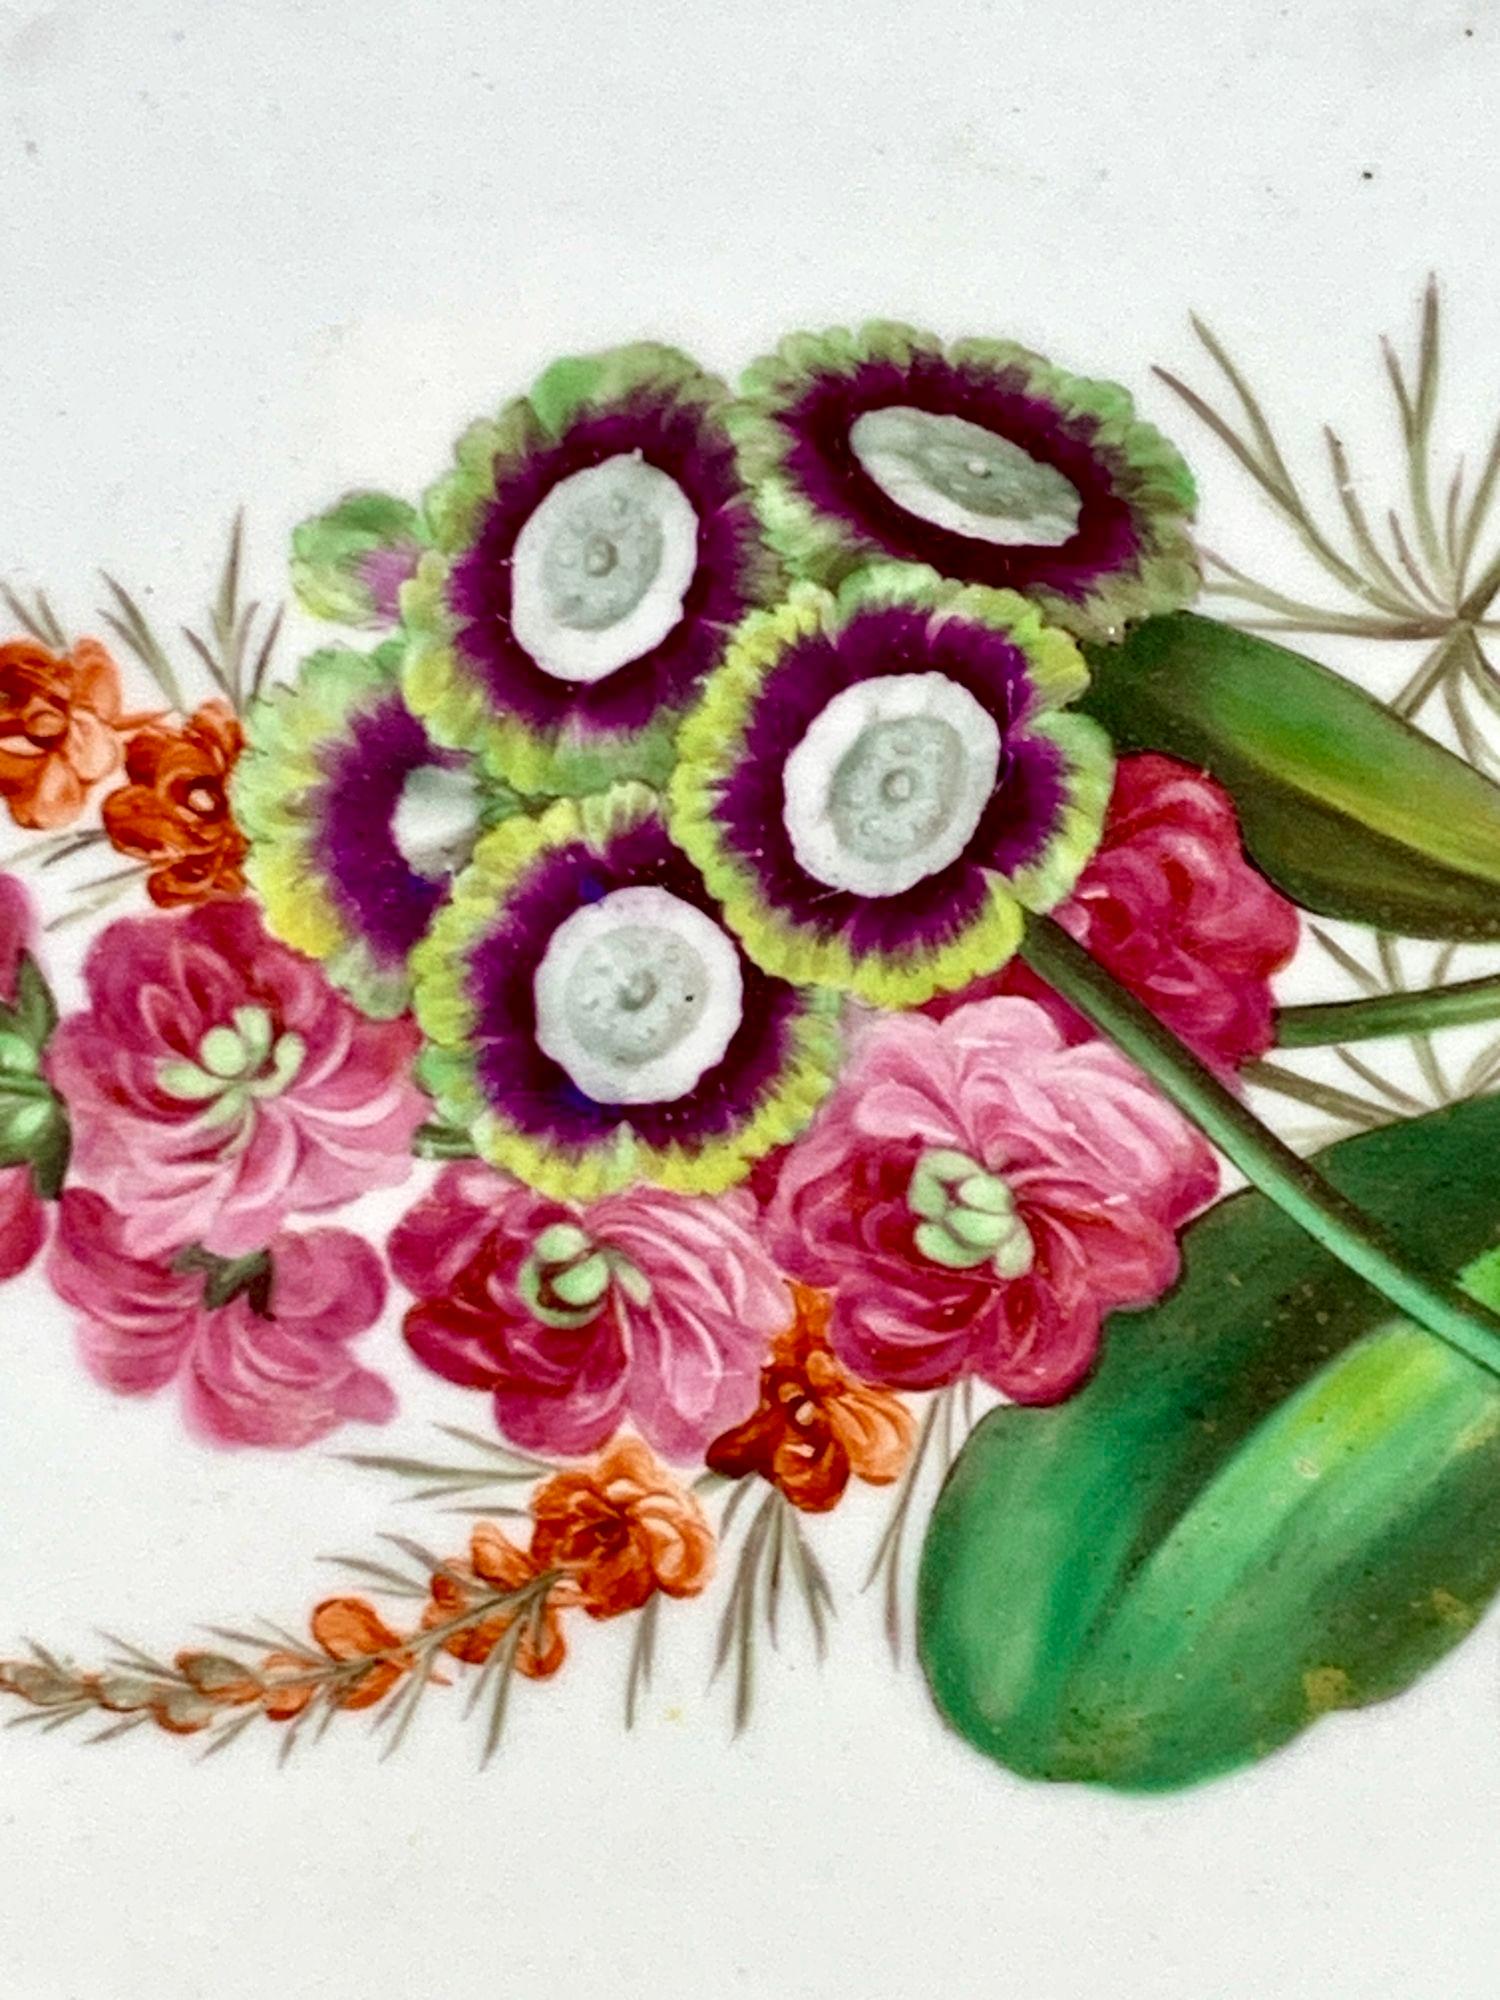 These dishes were hand painted at Spode in England around 1820.
During the late 18th and early 19th century, flower painting was a popular style for decorating English porcelain.
One possible reason for this trend is that porcelain, like a flower,